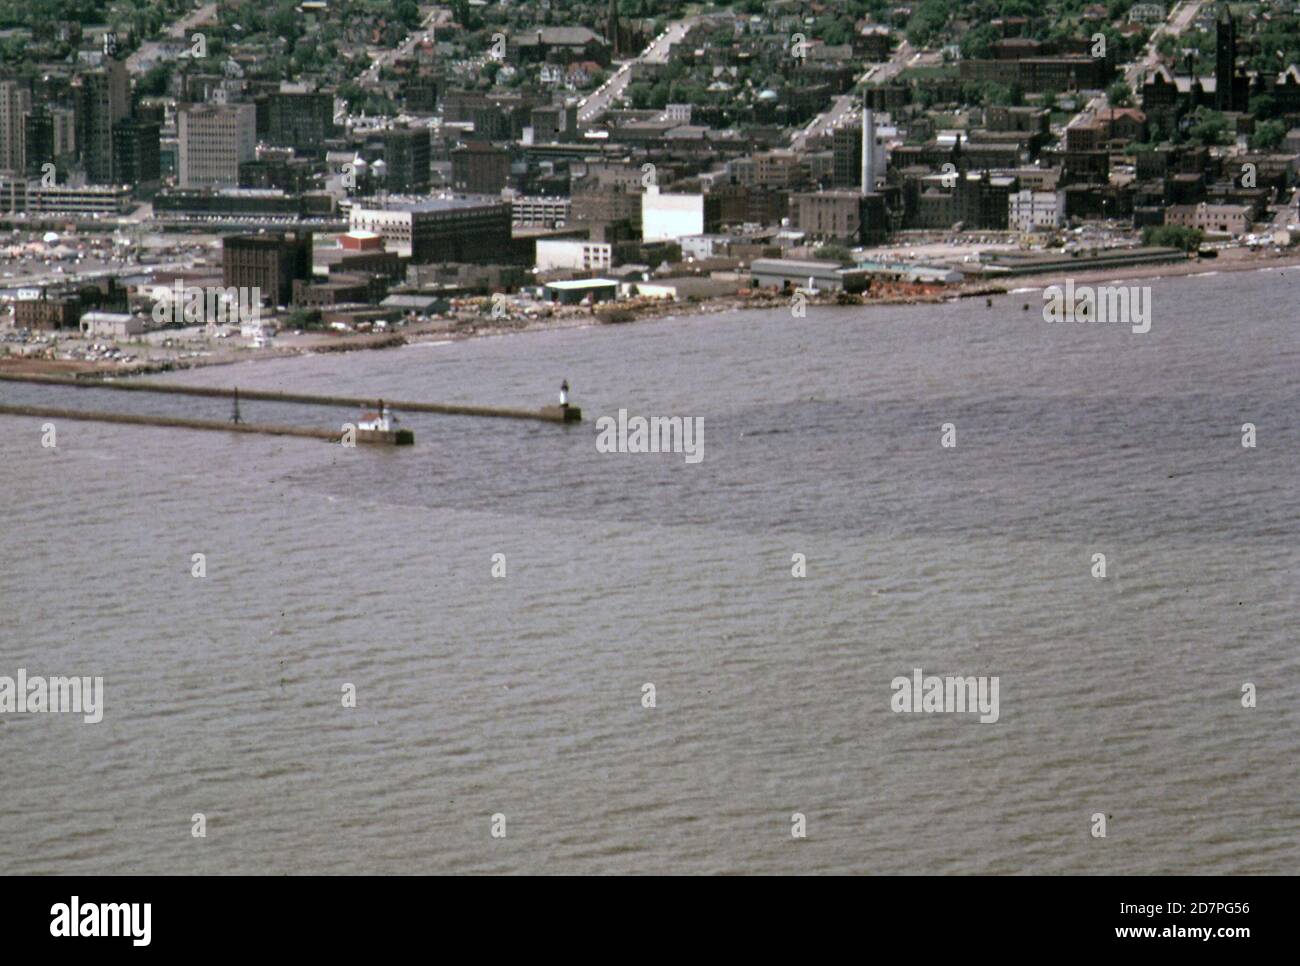 The St. Louis River basin discharges its waters into Lake Superior through the Duluth Ship Canal. The river waters show as the dark patch on the lake (in or near Duluth Minnesota) ca. 1973 Stock Photo